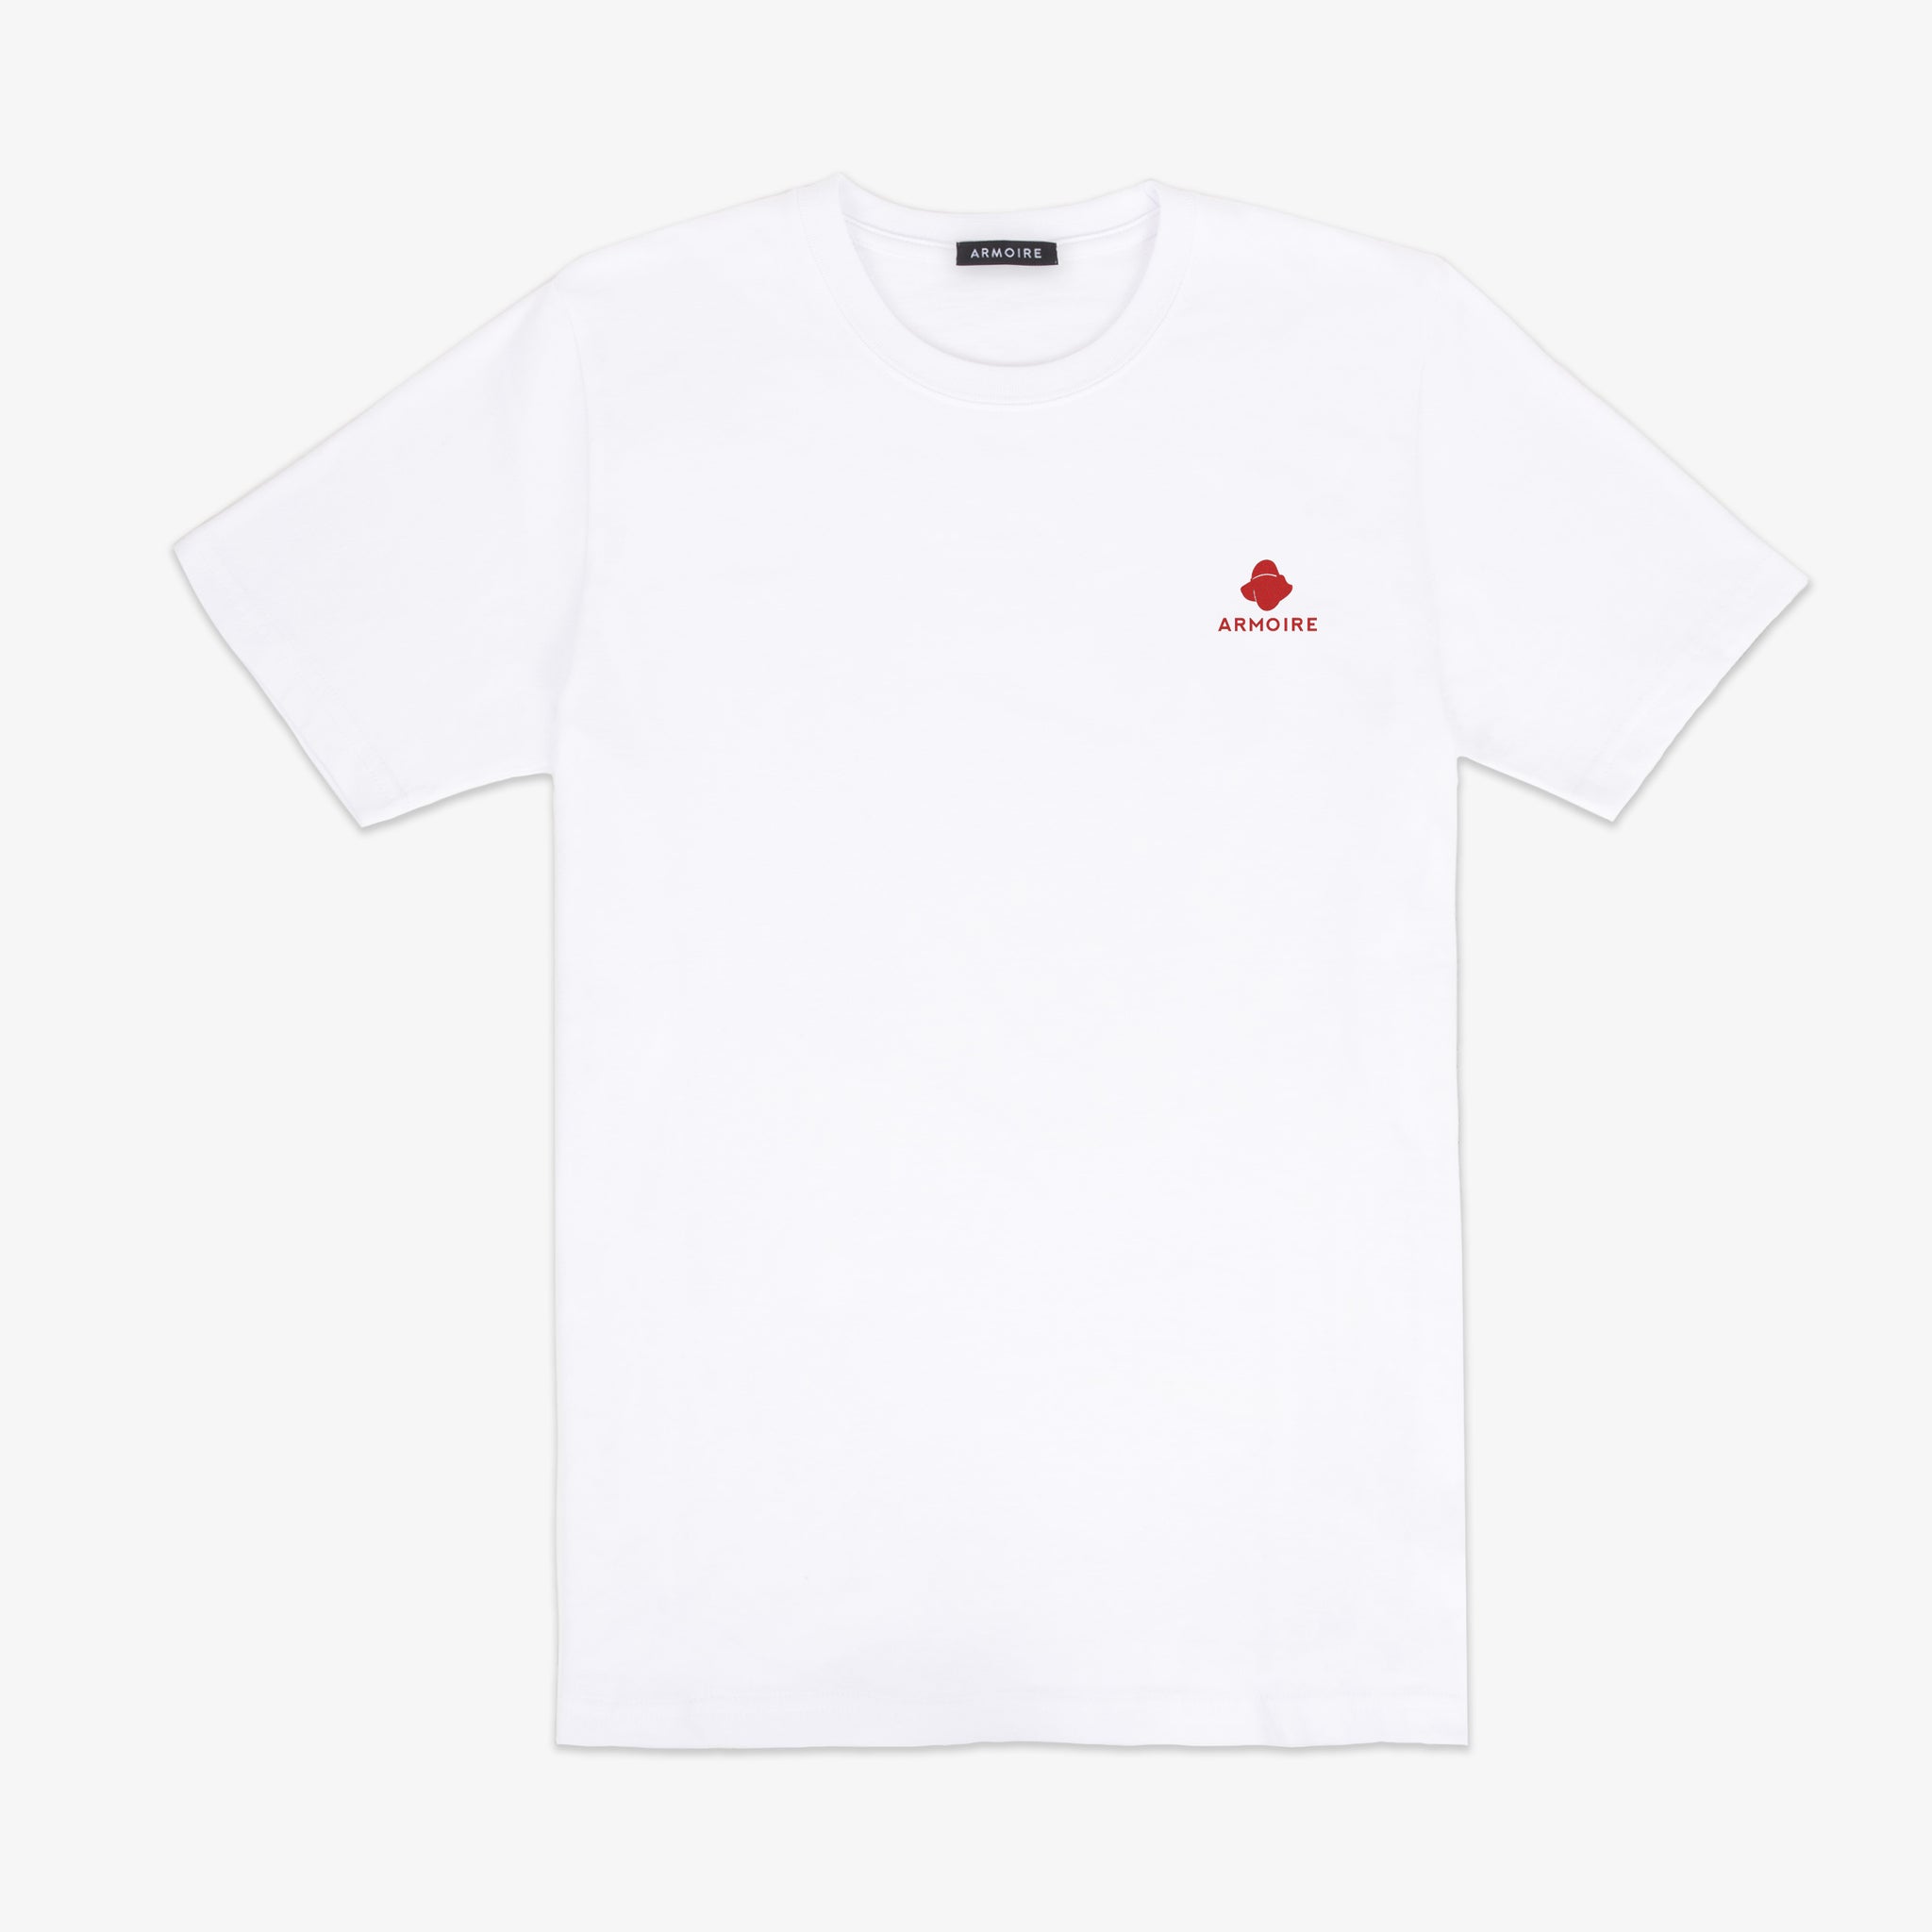 ARMOIRE Traveling Man Tee - White and Red